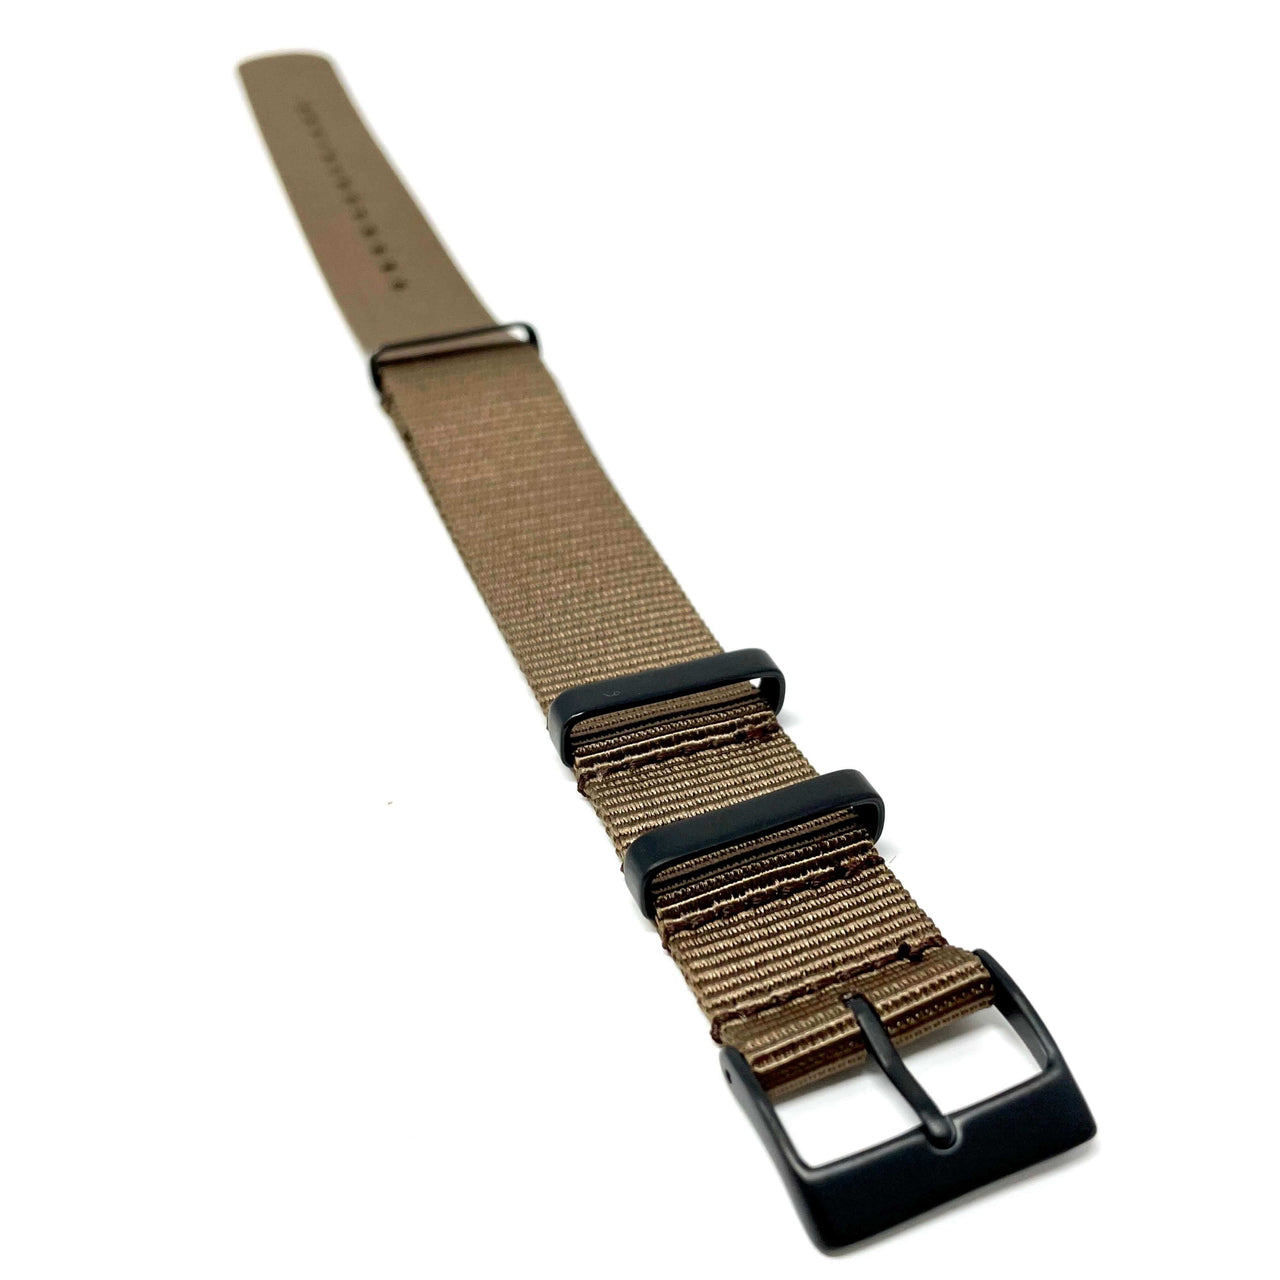 Classic Military Style Strap - Wadi Brown With Black Buckle